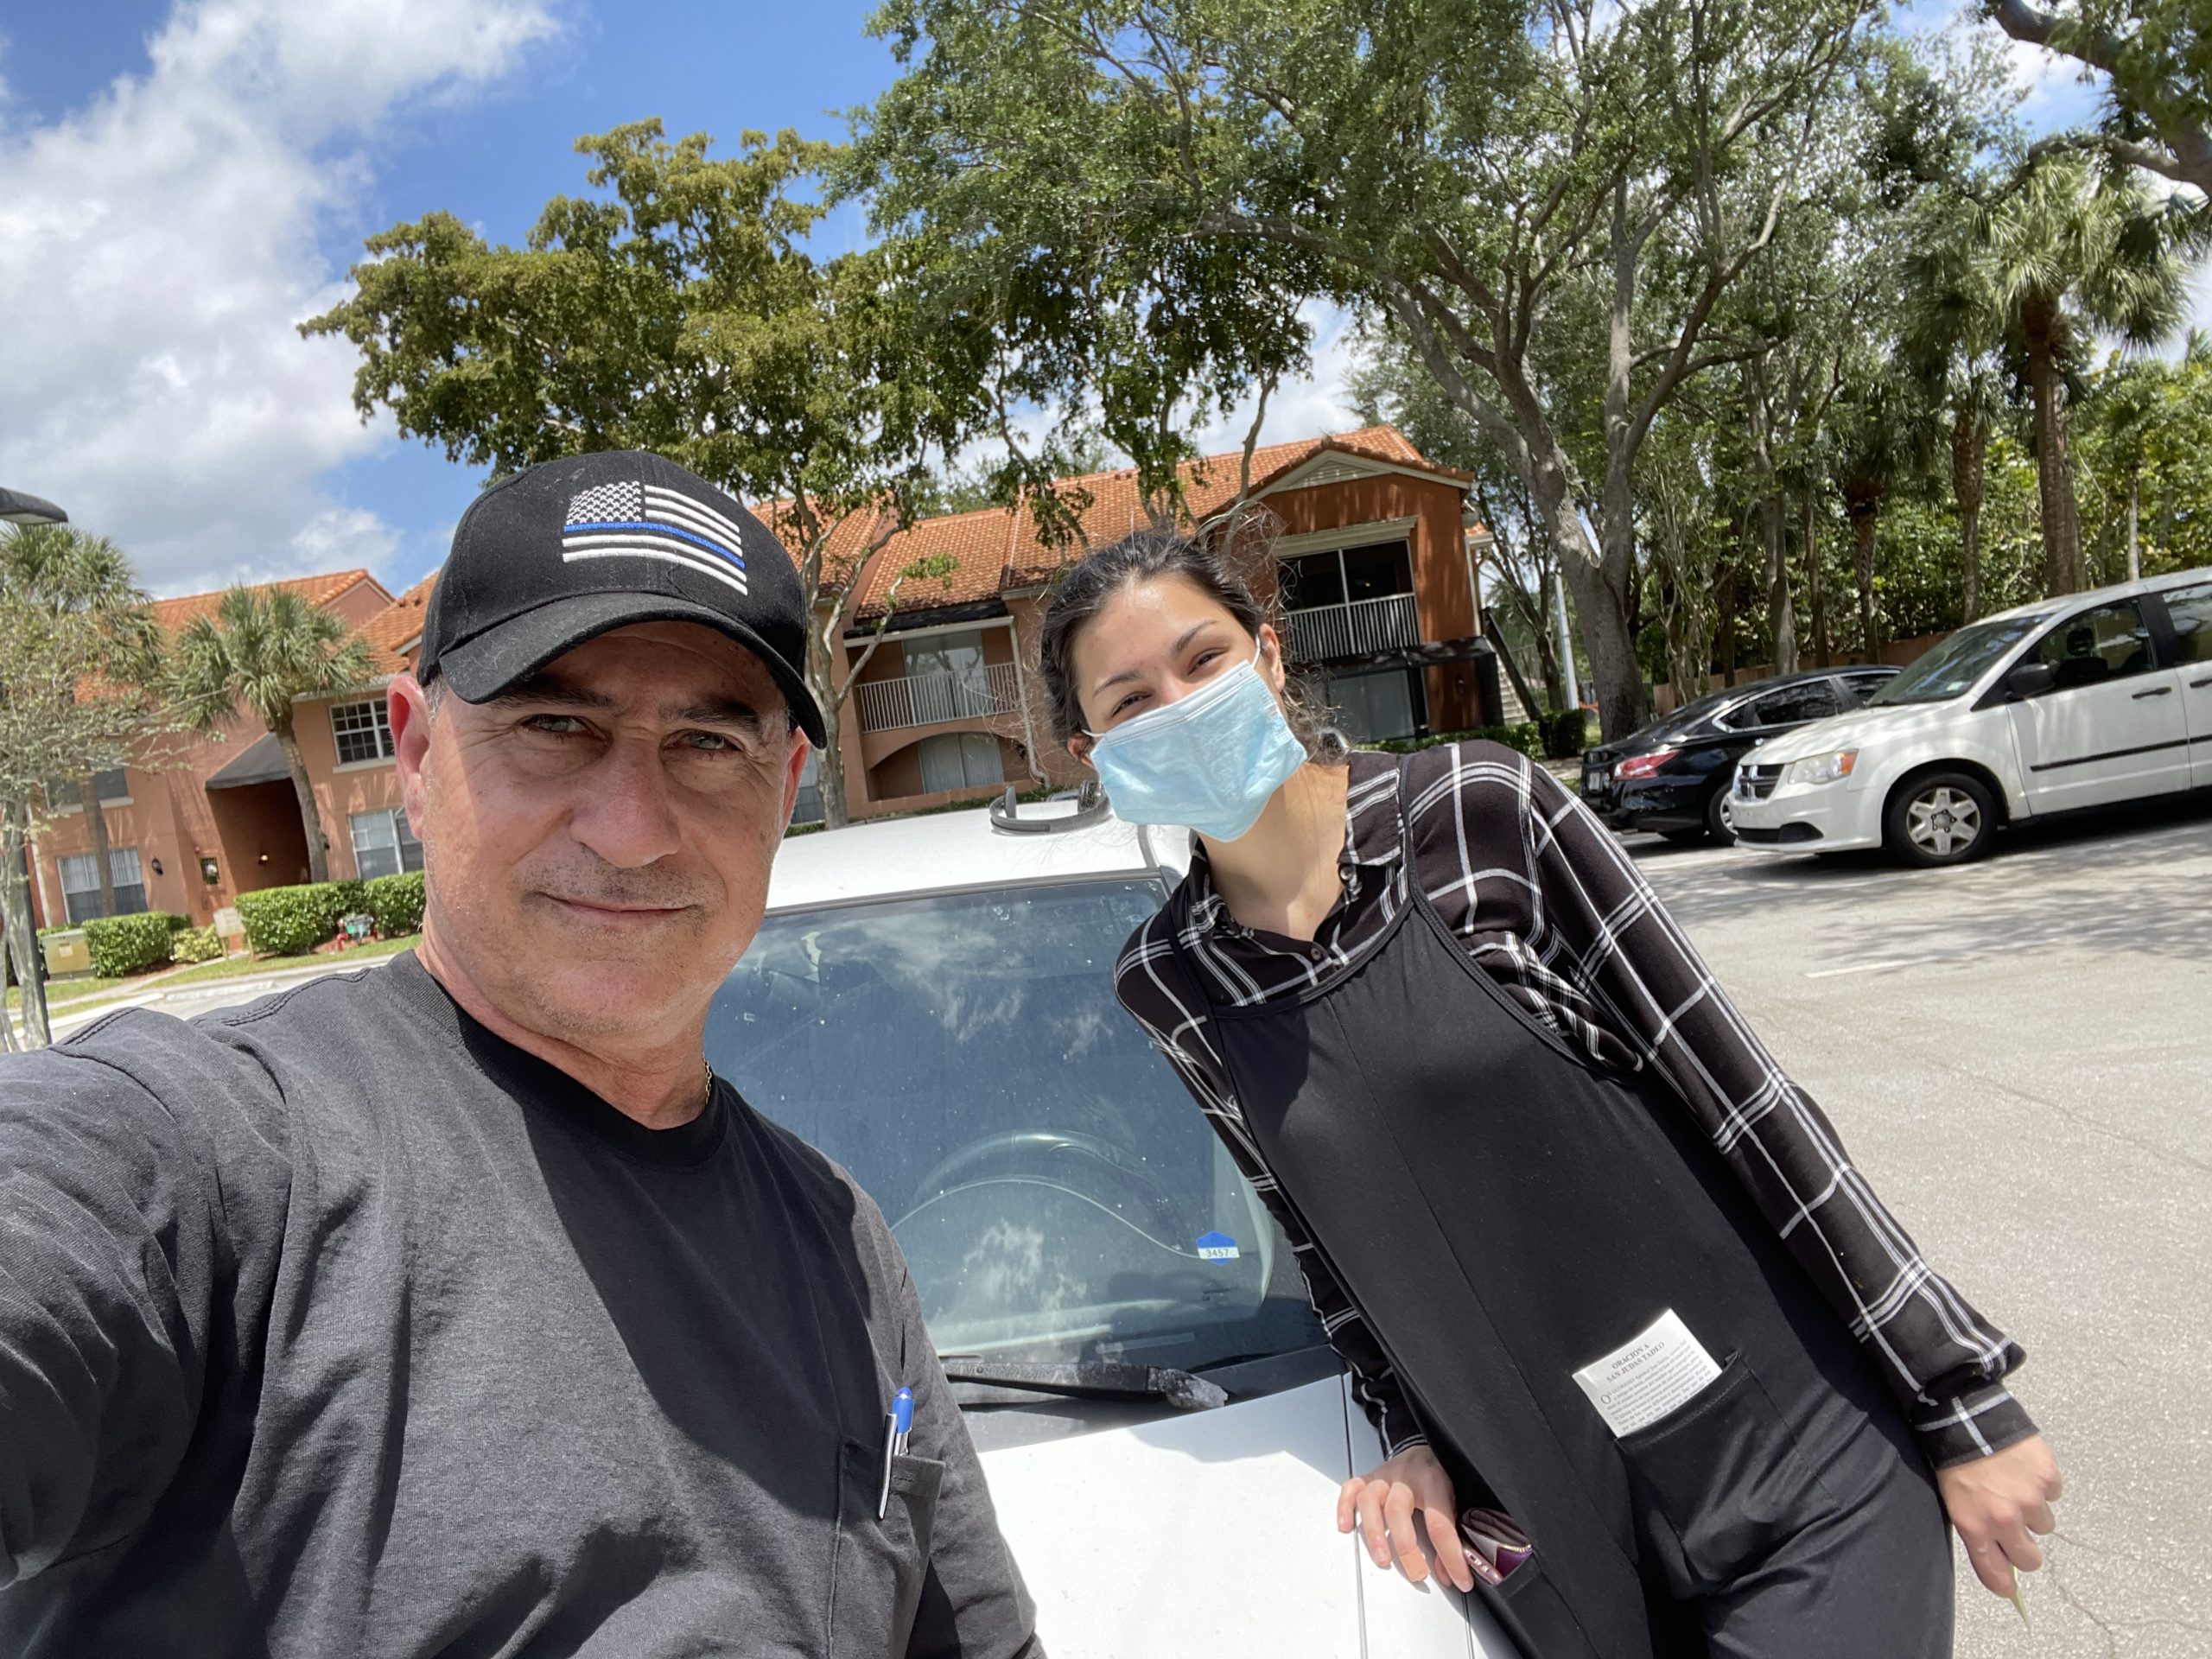 Junk Car Removal For Cash in South Florida